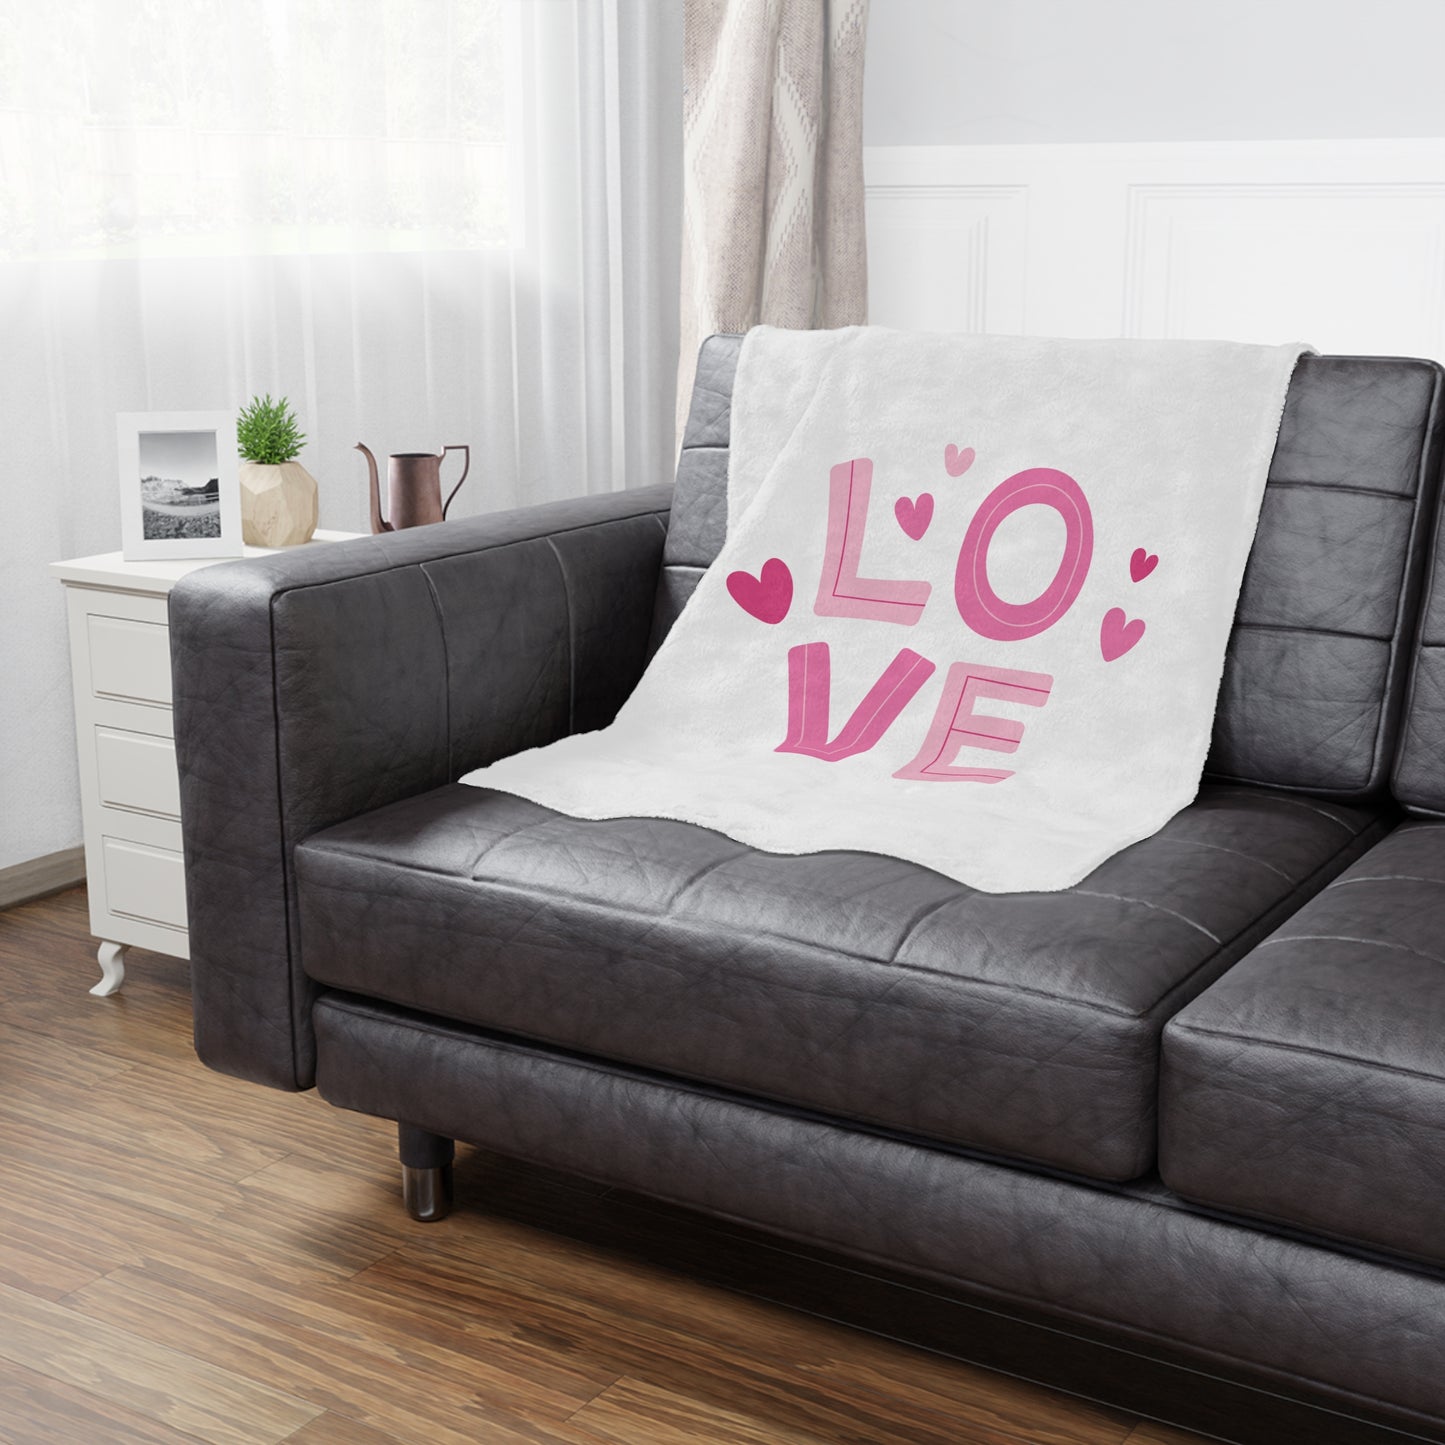 Love with Flying Heart Printed Minky Blanket for Valentine Day Gift